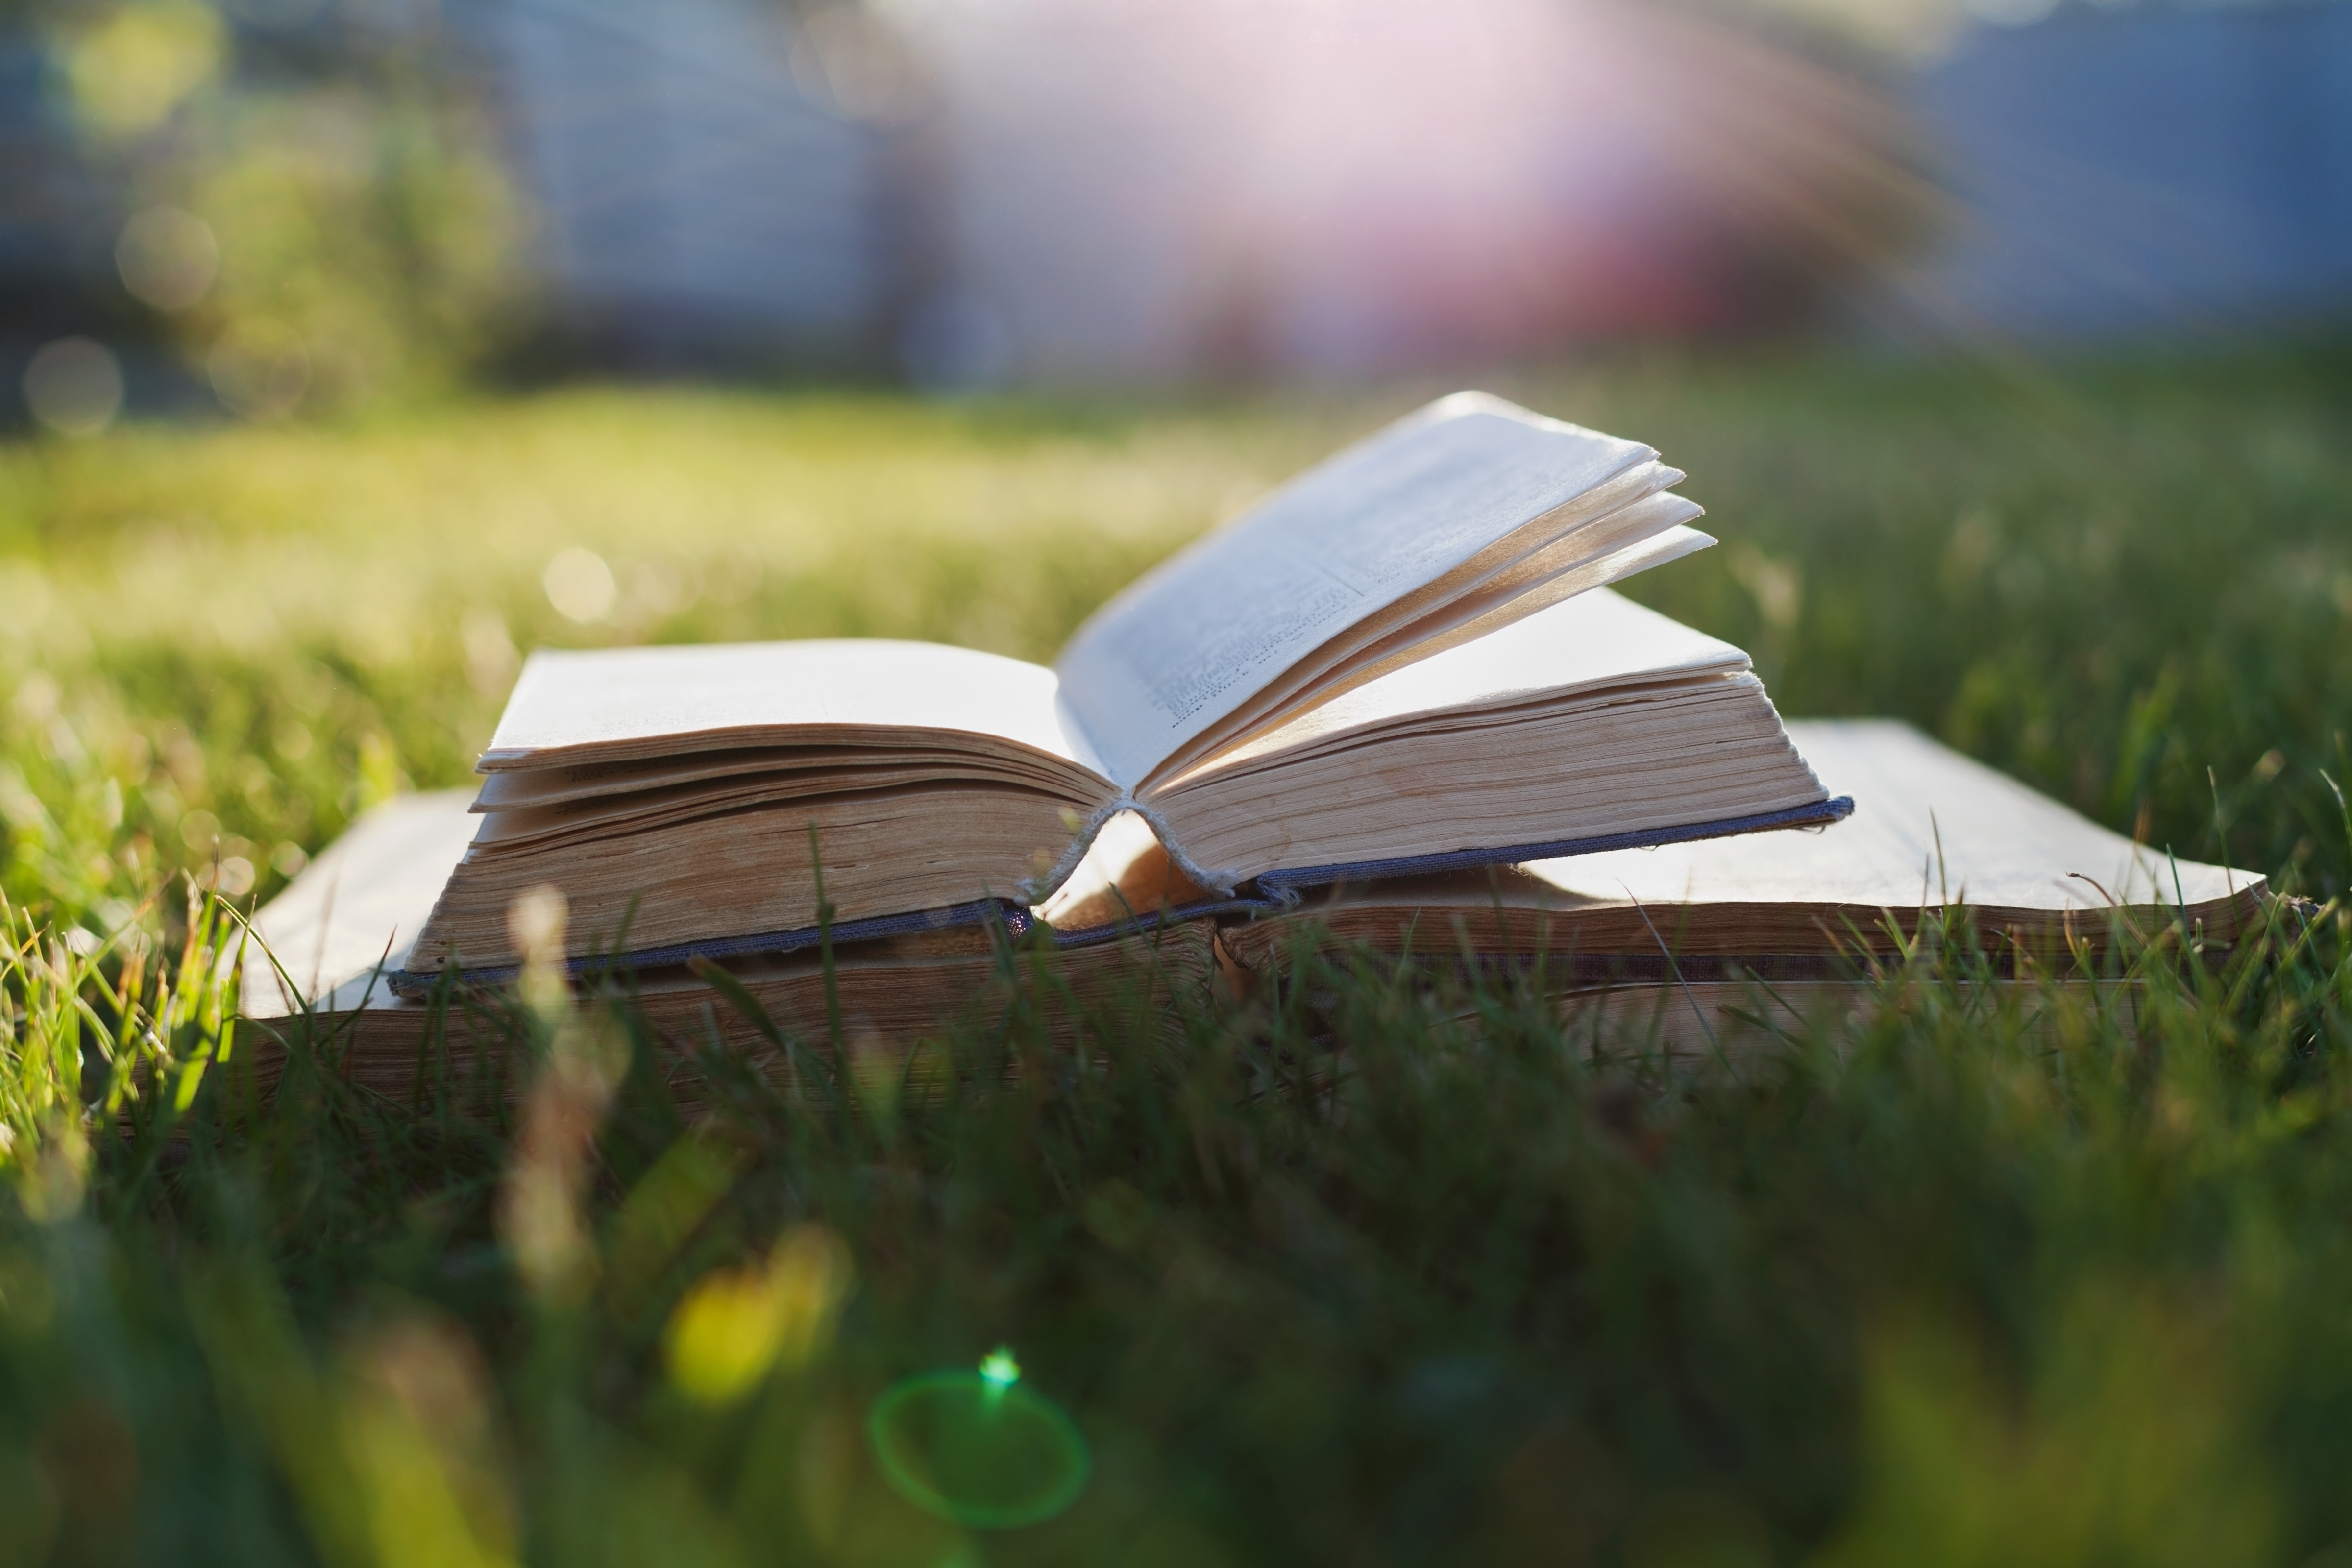 Open book on a green grass against beautiful sunset lights with sun ray, selective focus and shallow dof